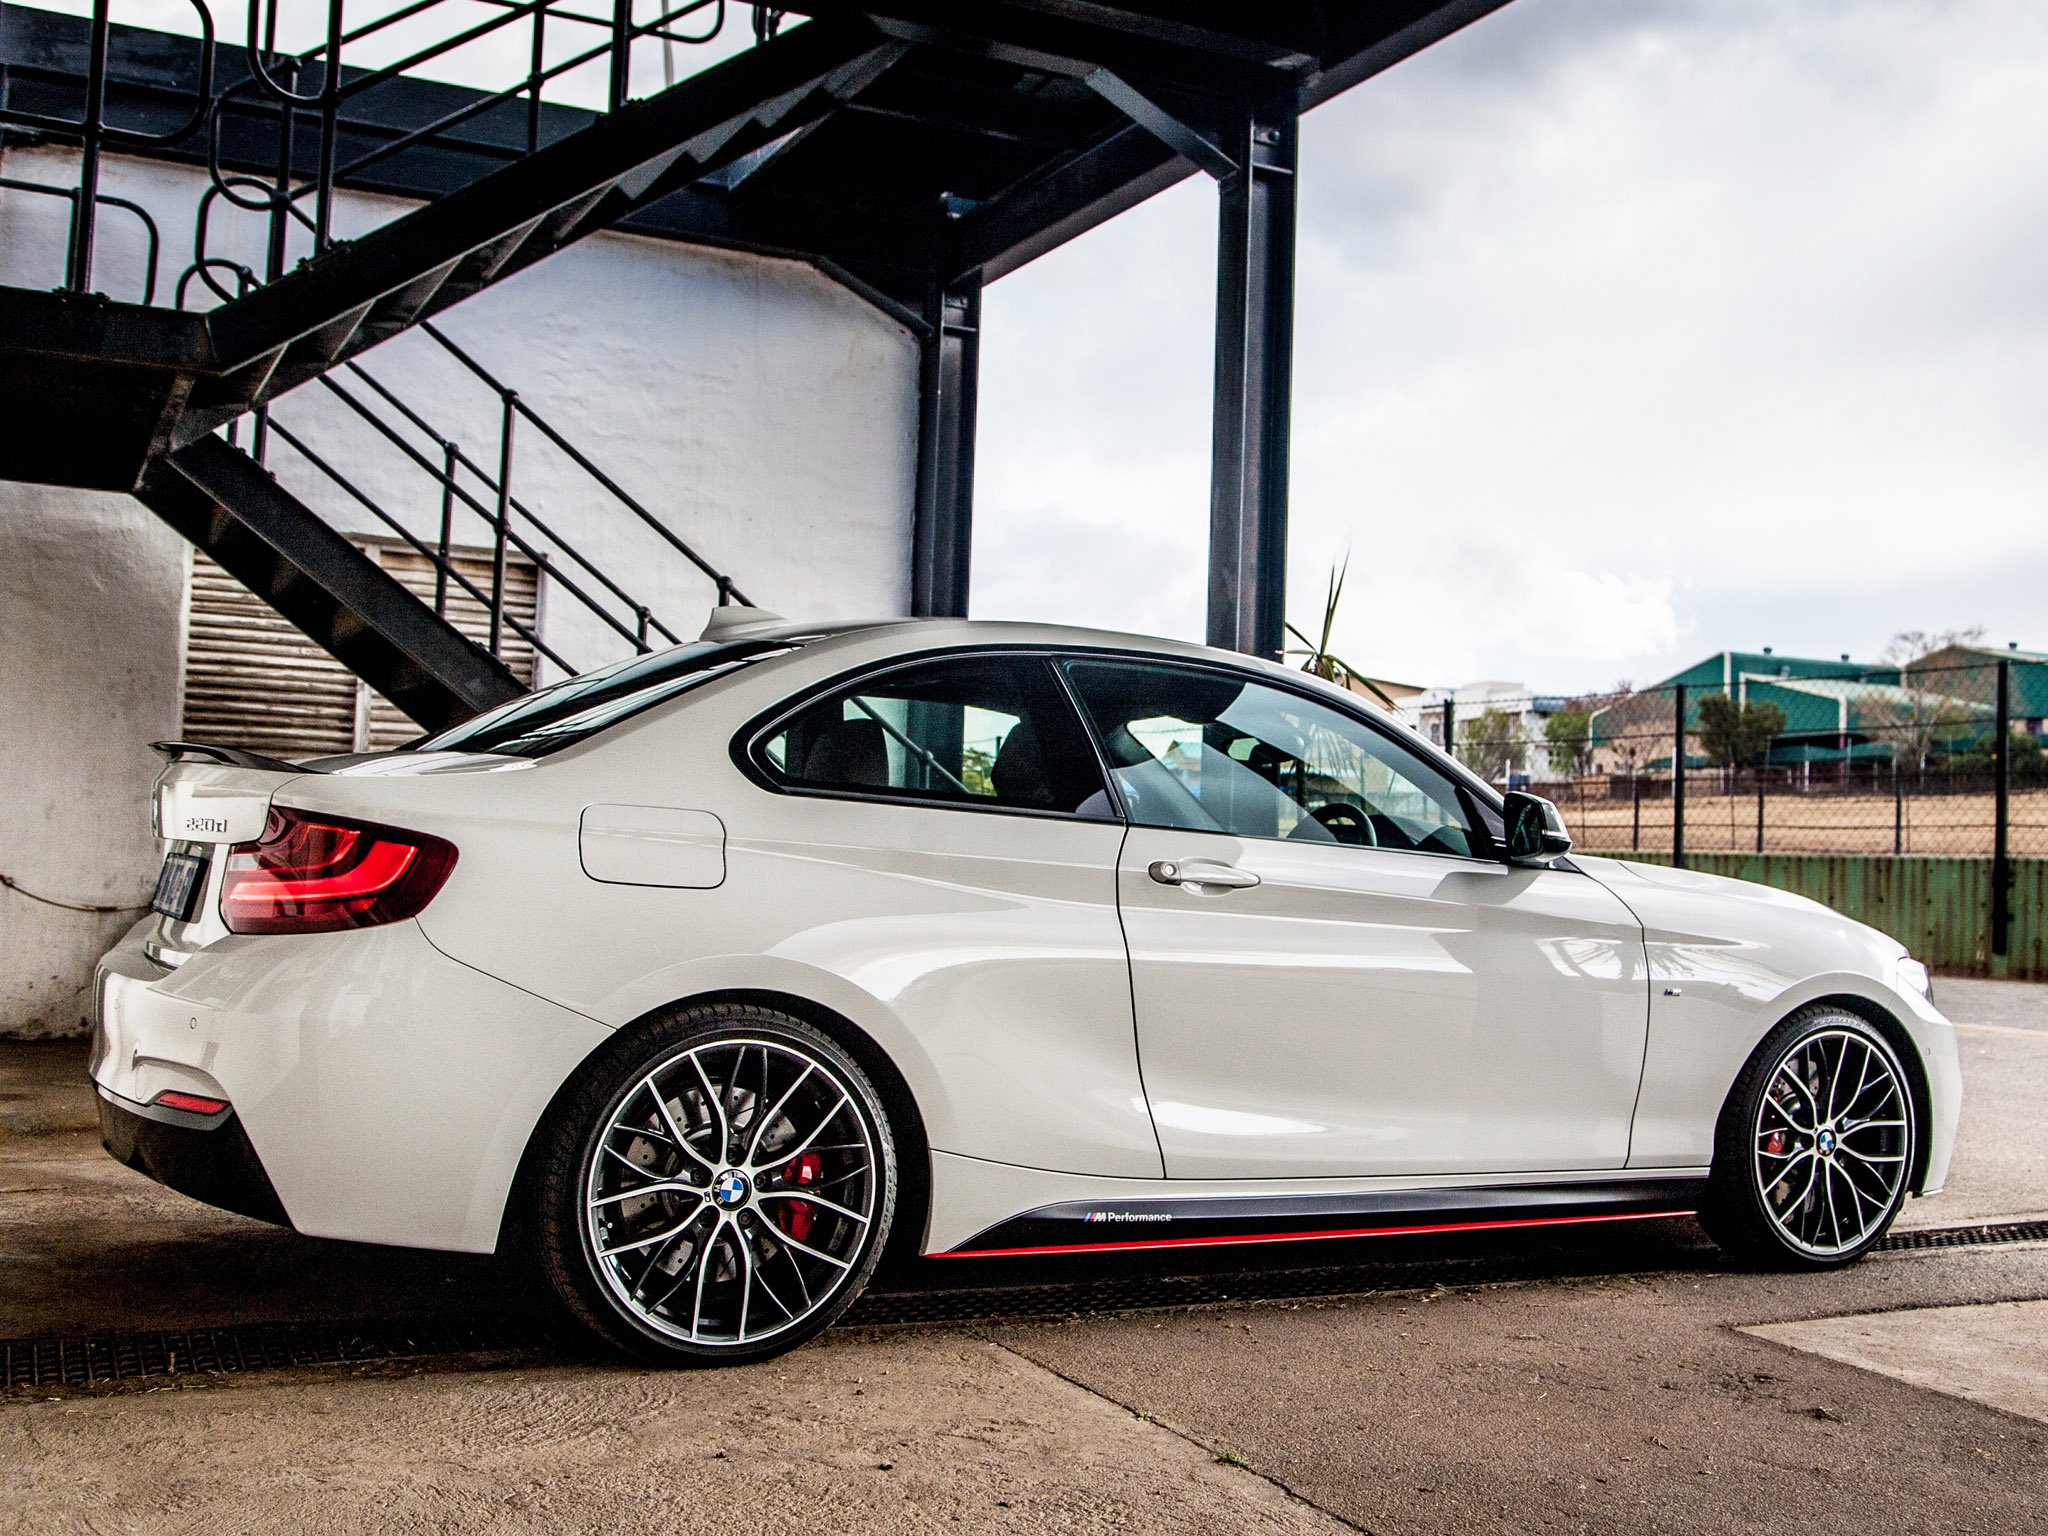 bmw, 2 series, M220d, Coupe, M performance, Accessories, F22, 2014 Wallpaper